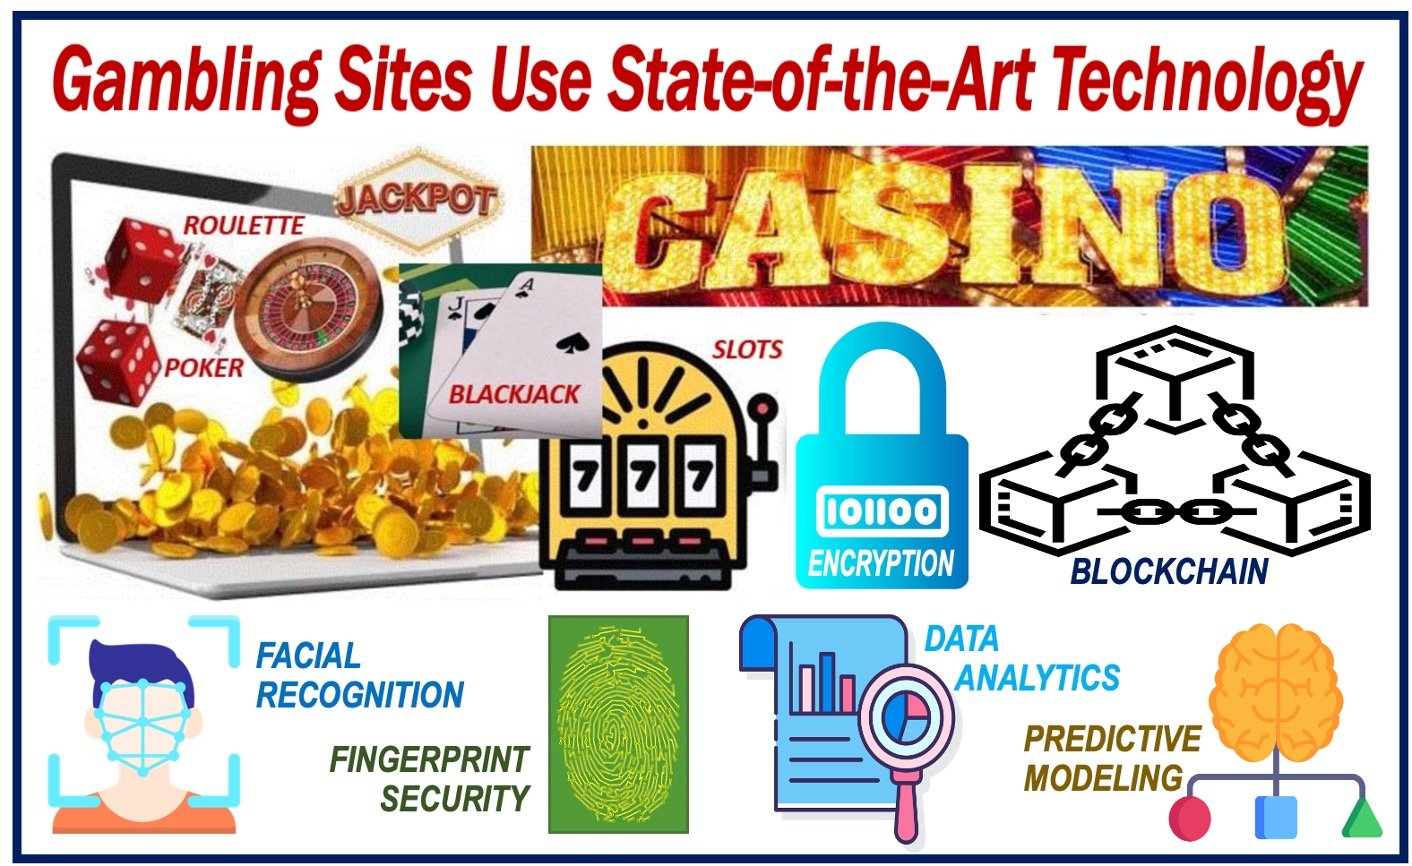 Image depicting tech advantages in gambling sites